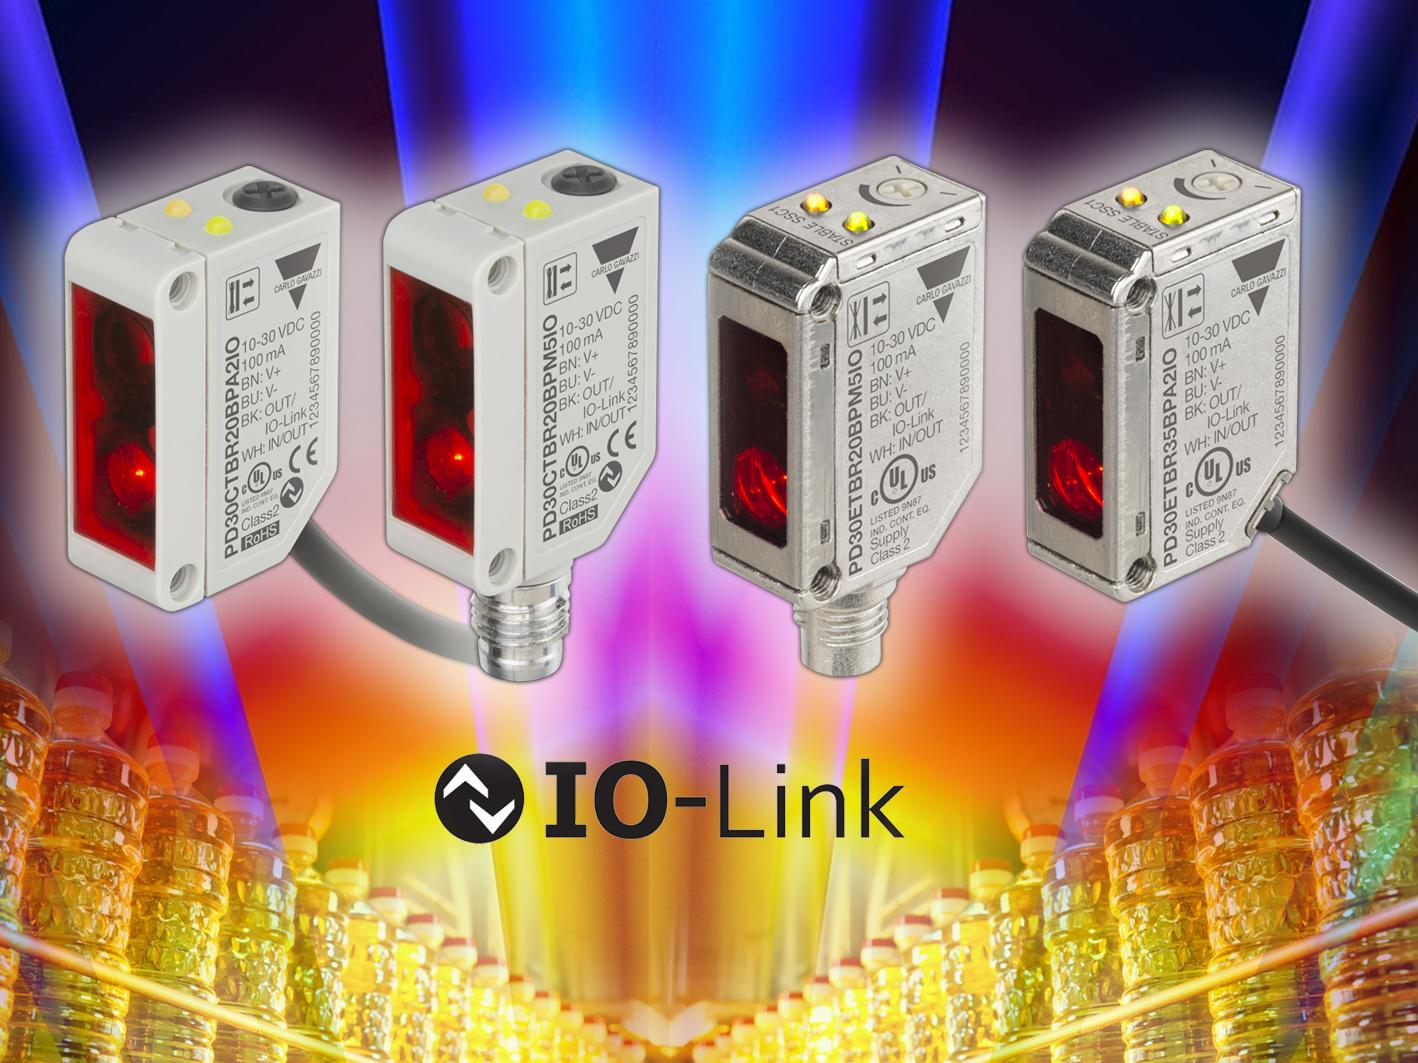 New era begins with PD30 Photoelectric sensors and IO-Link